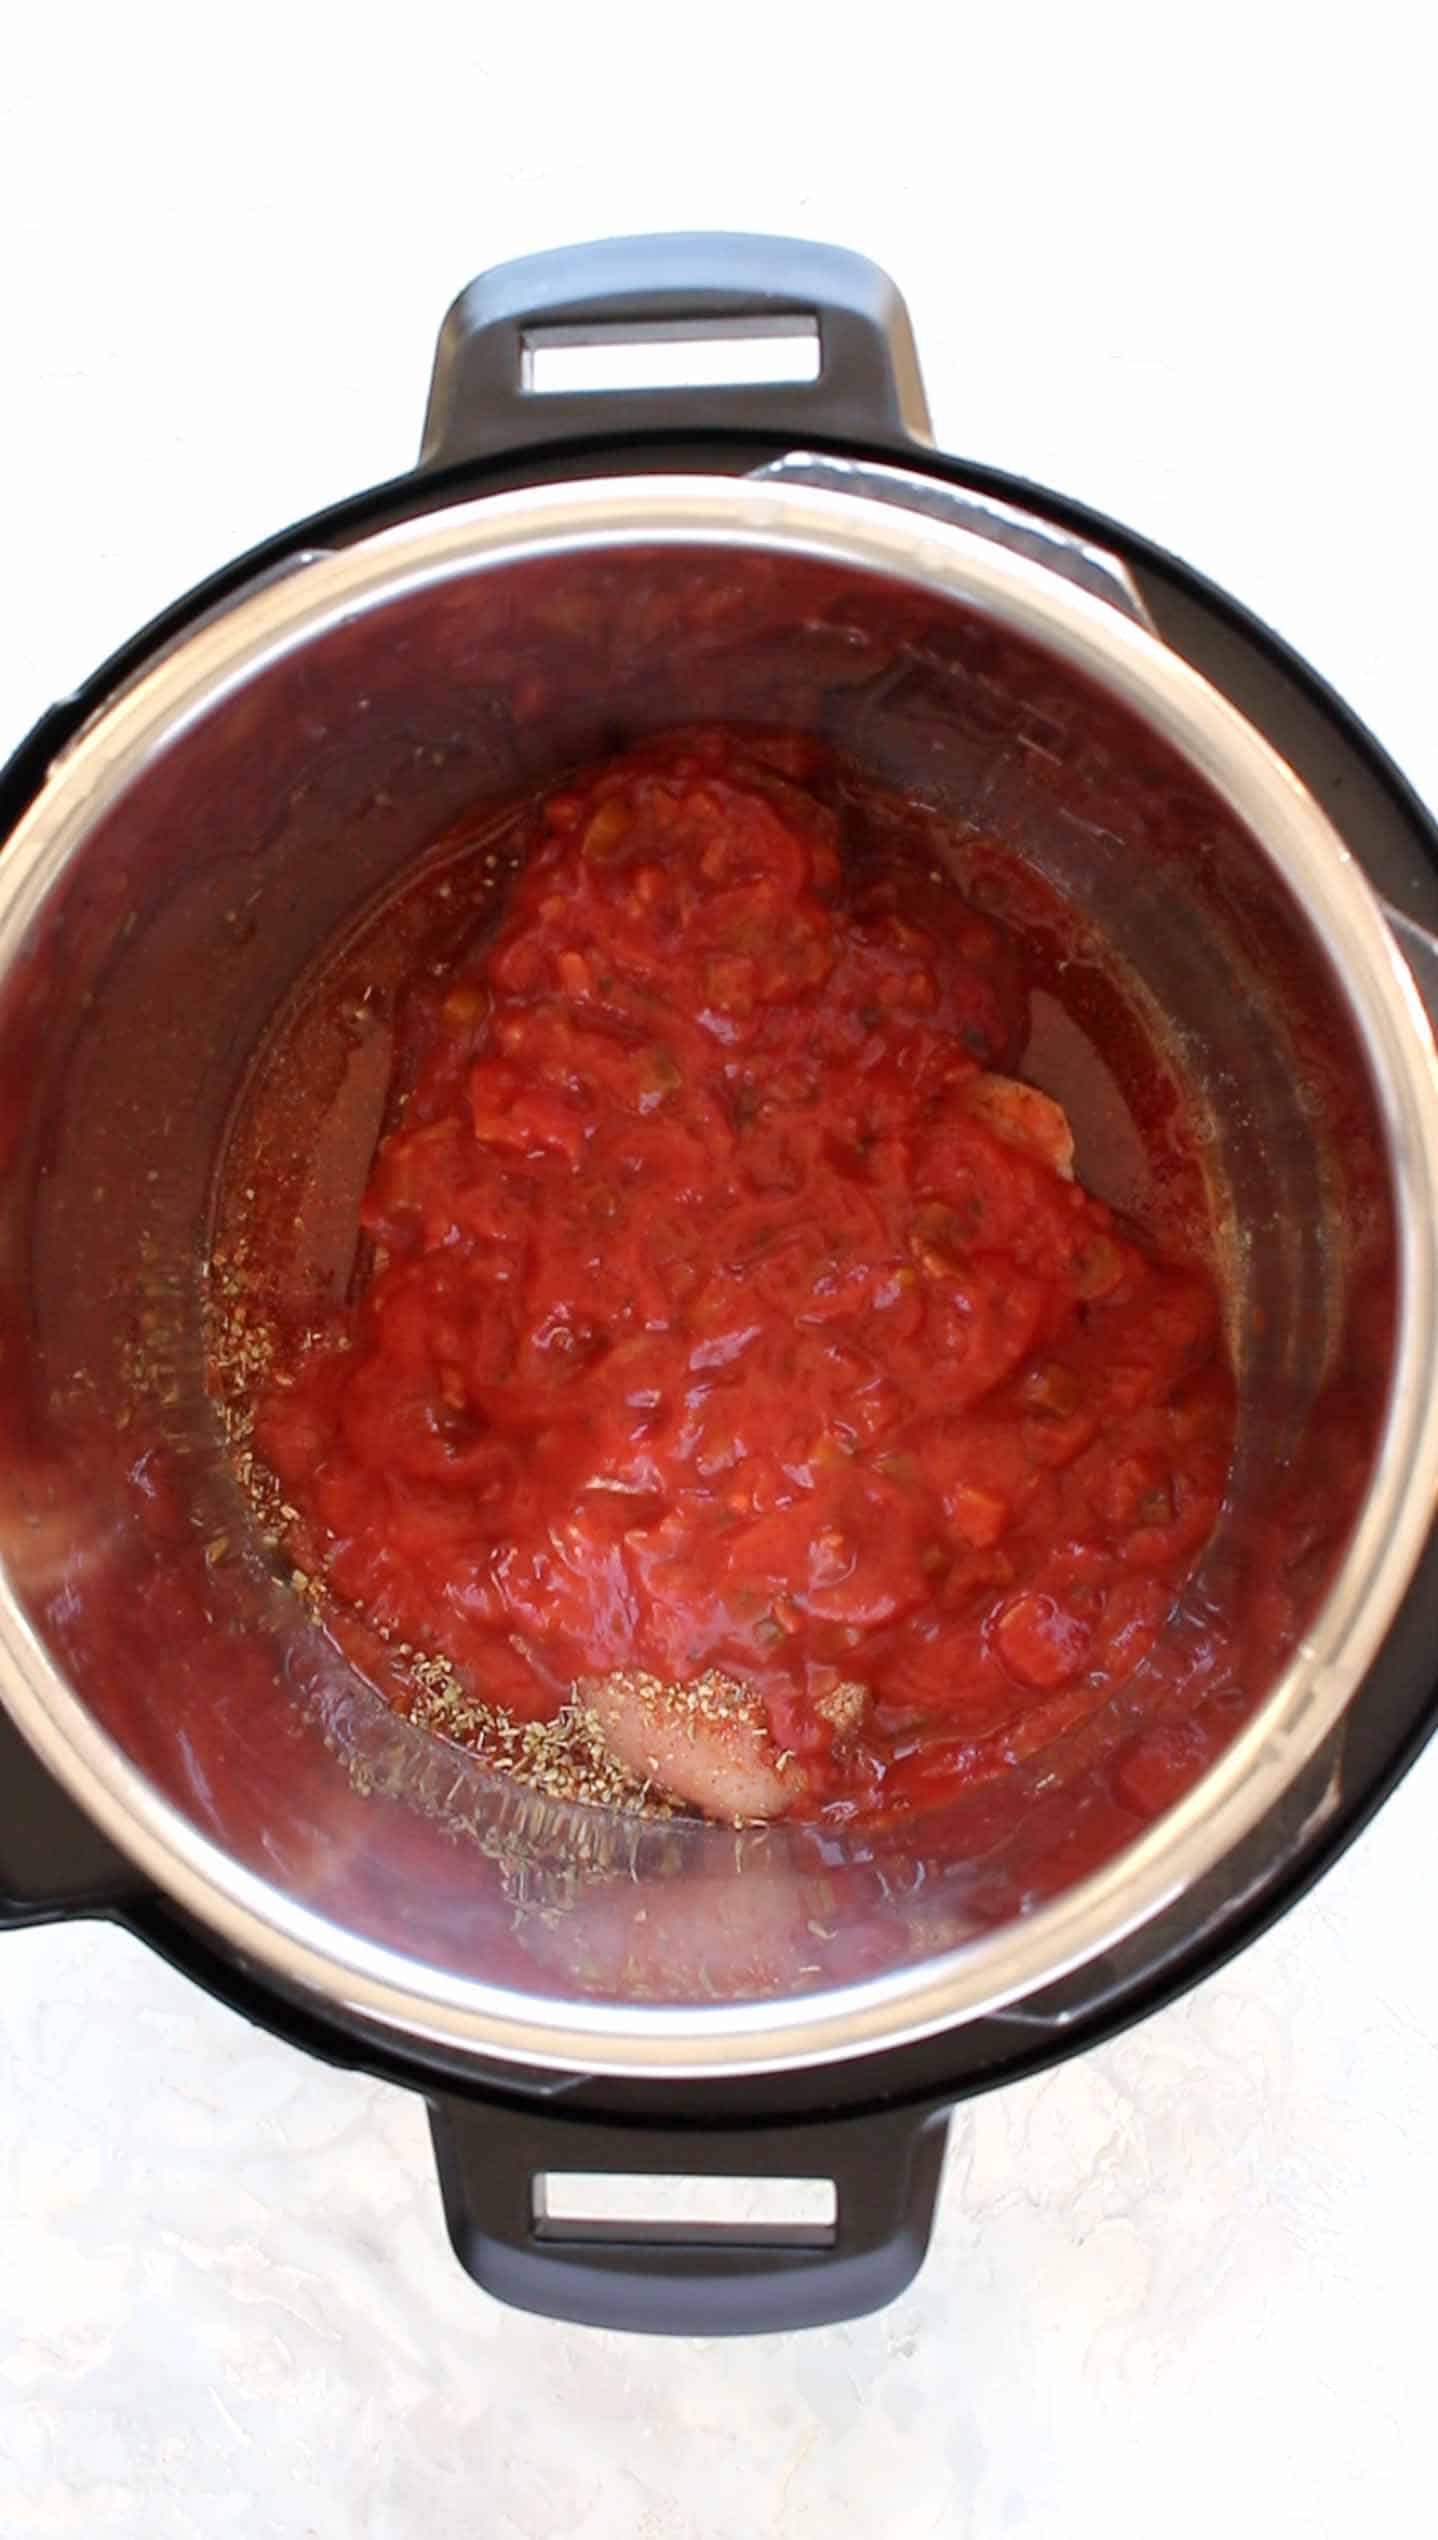 Next, layer the salsa on top of the chicken breasts. Try to keep most of the salsa on top of the breasts.